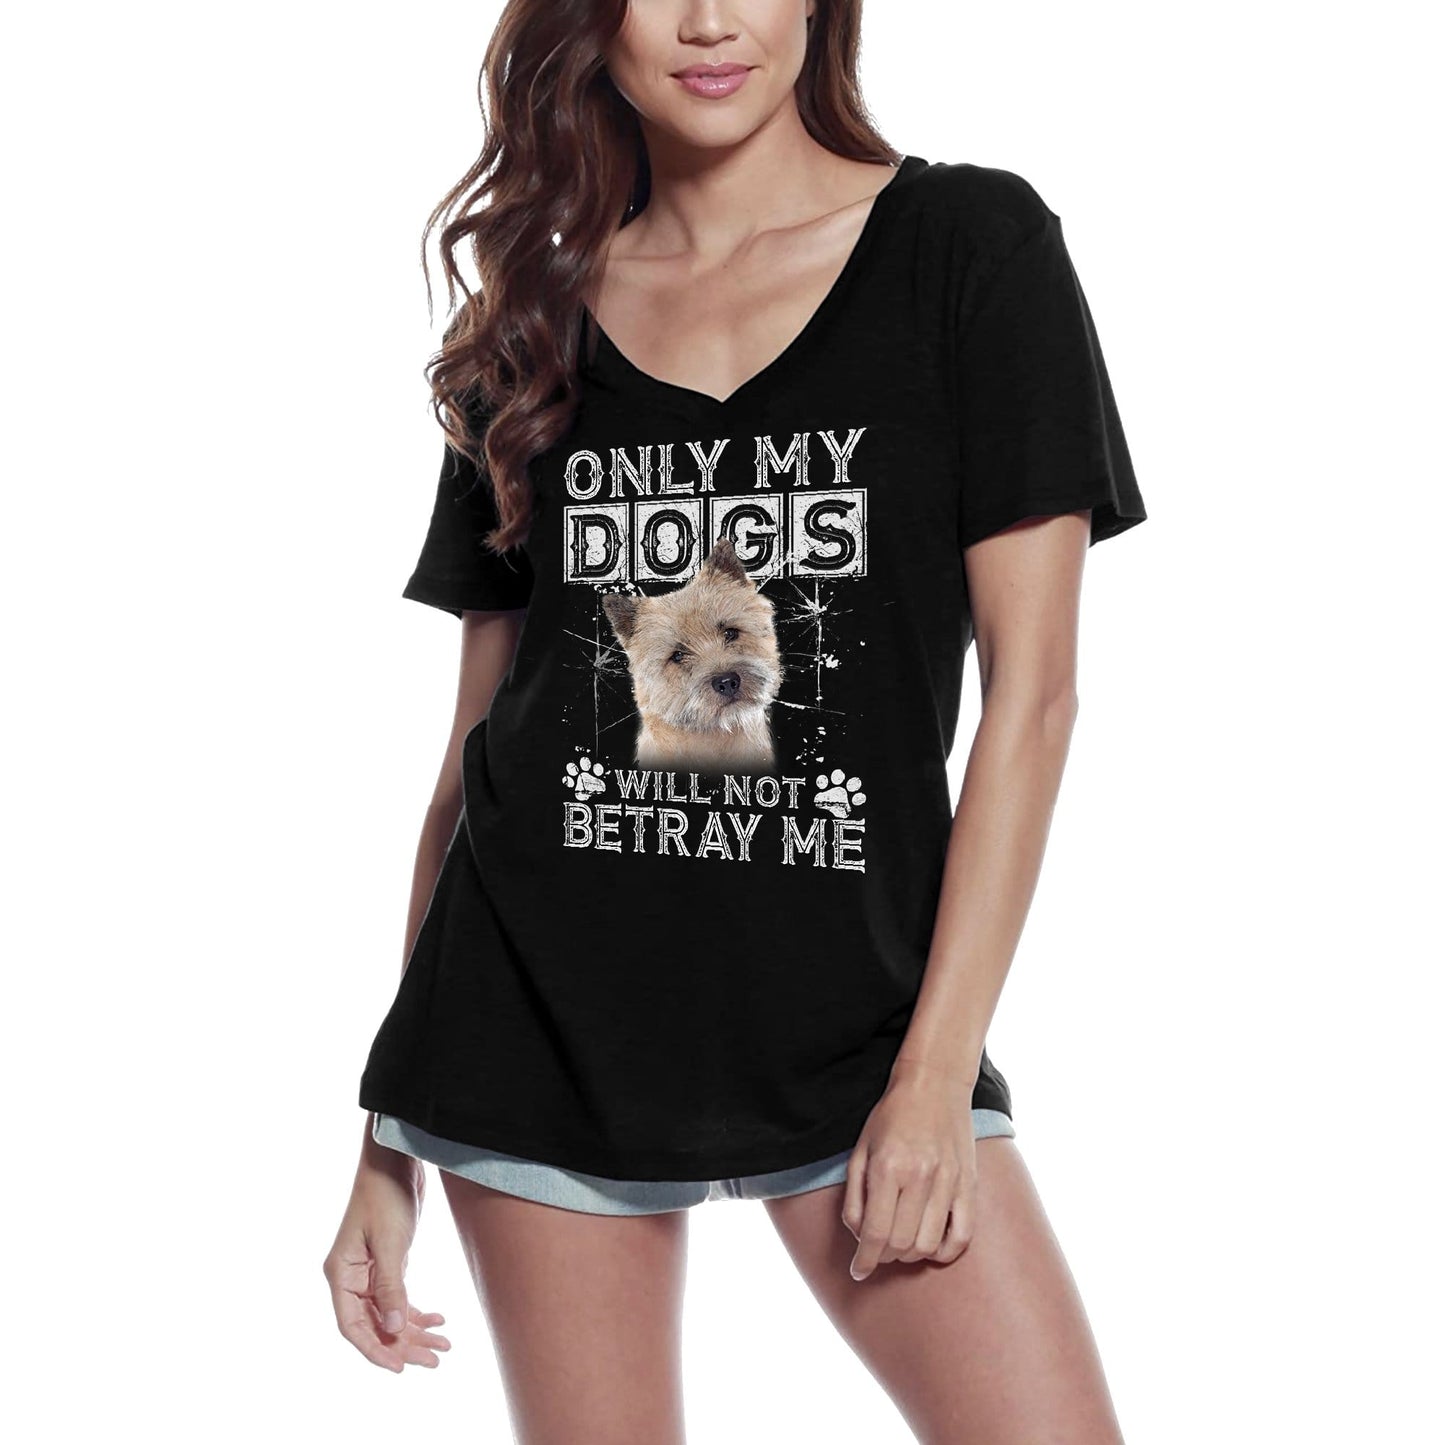 ULTRABASIC Women's T-Shirt Only My Dogs Will Not Betray Me - Cairn Terrier Cute Dog Paw